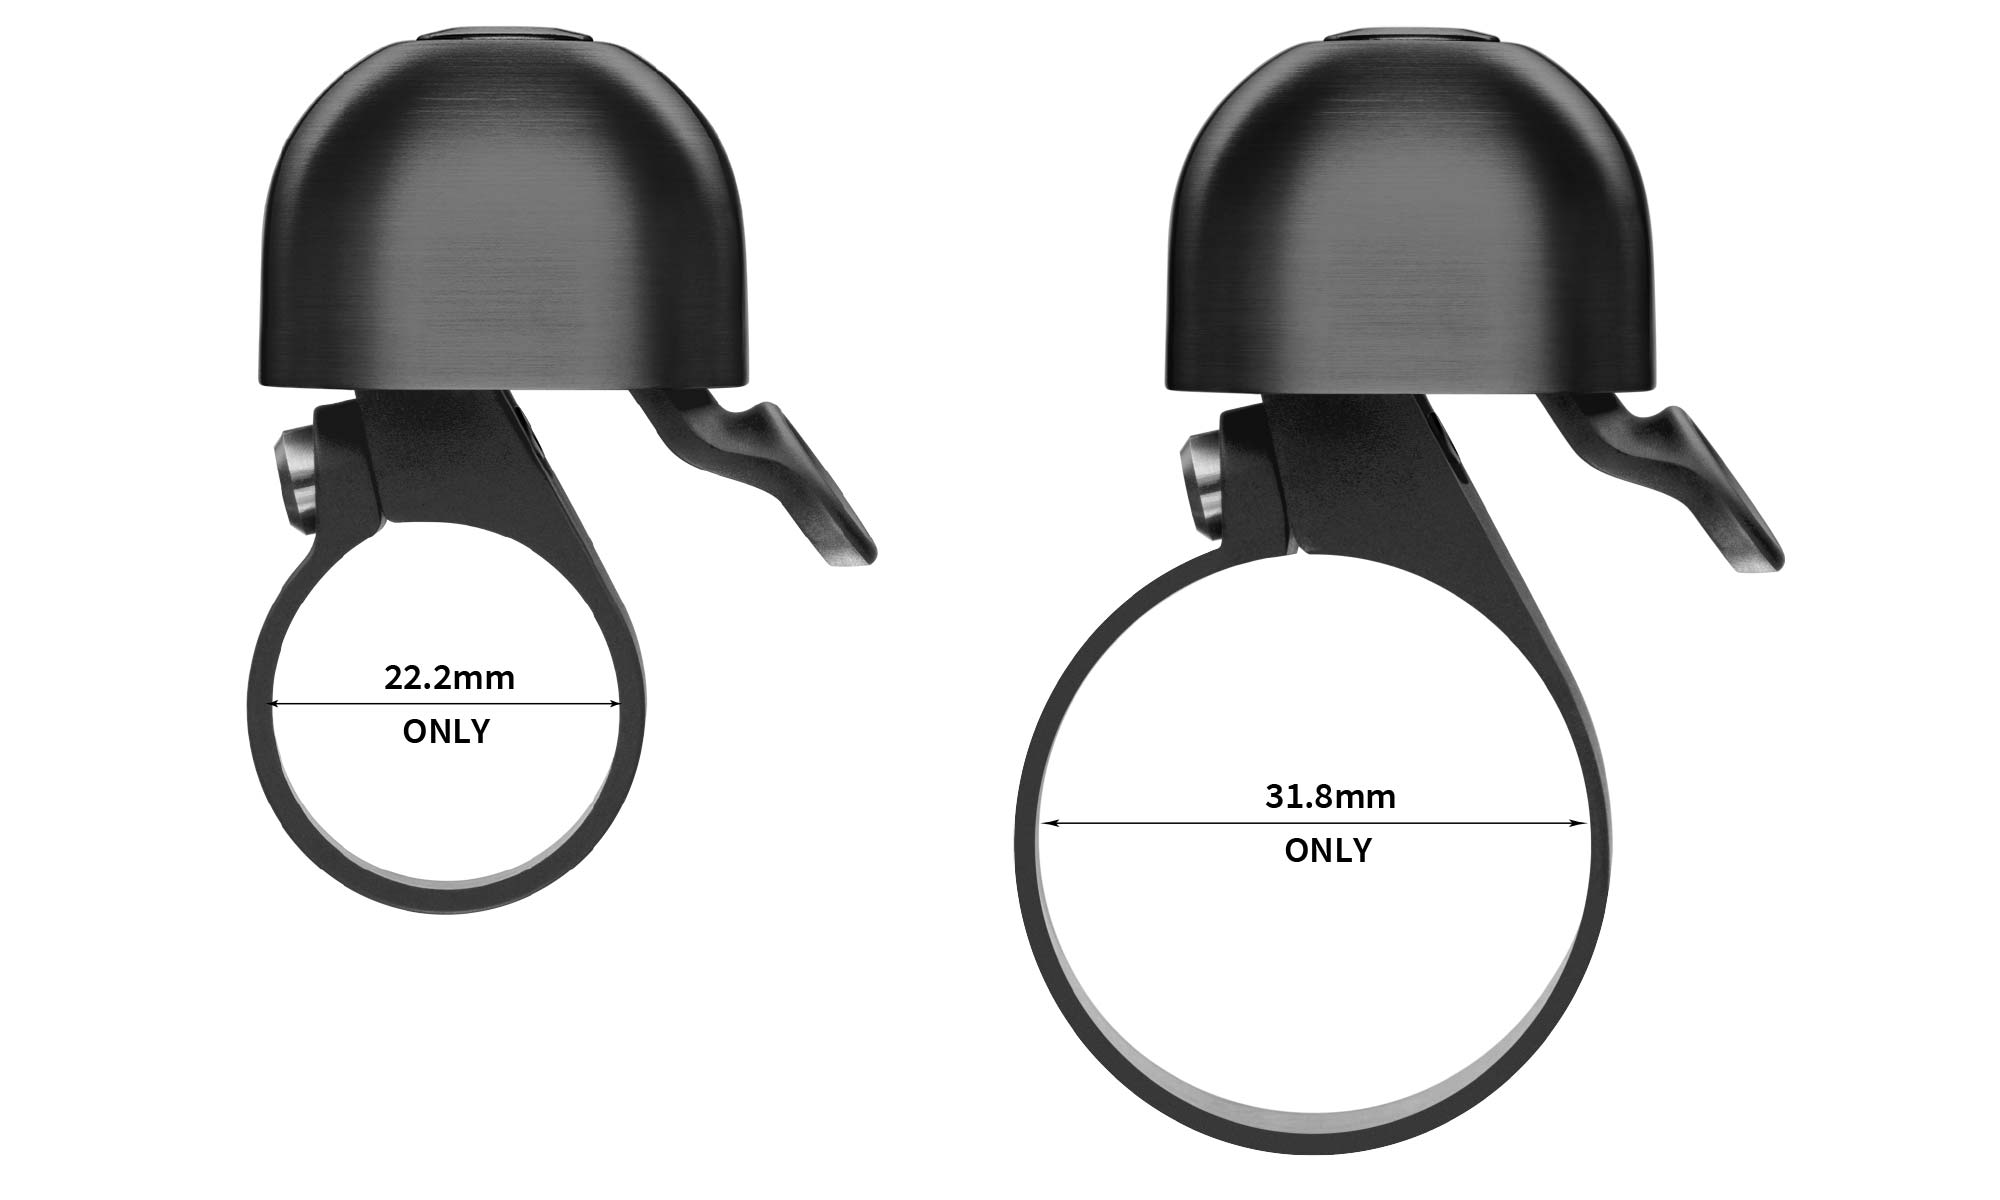 Spurcycle Compact Bell with 22.2mm or 31.8mm clamp, side dimensions